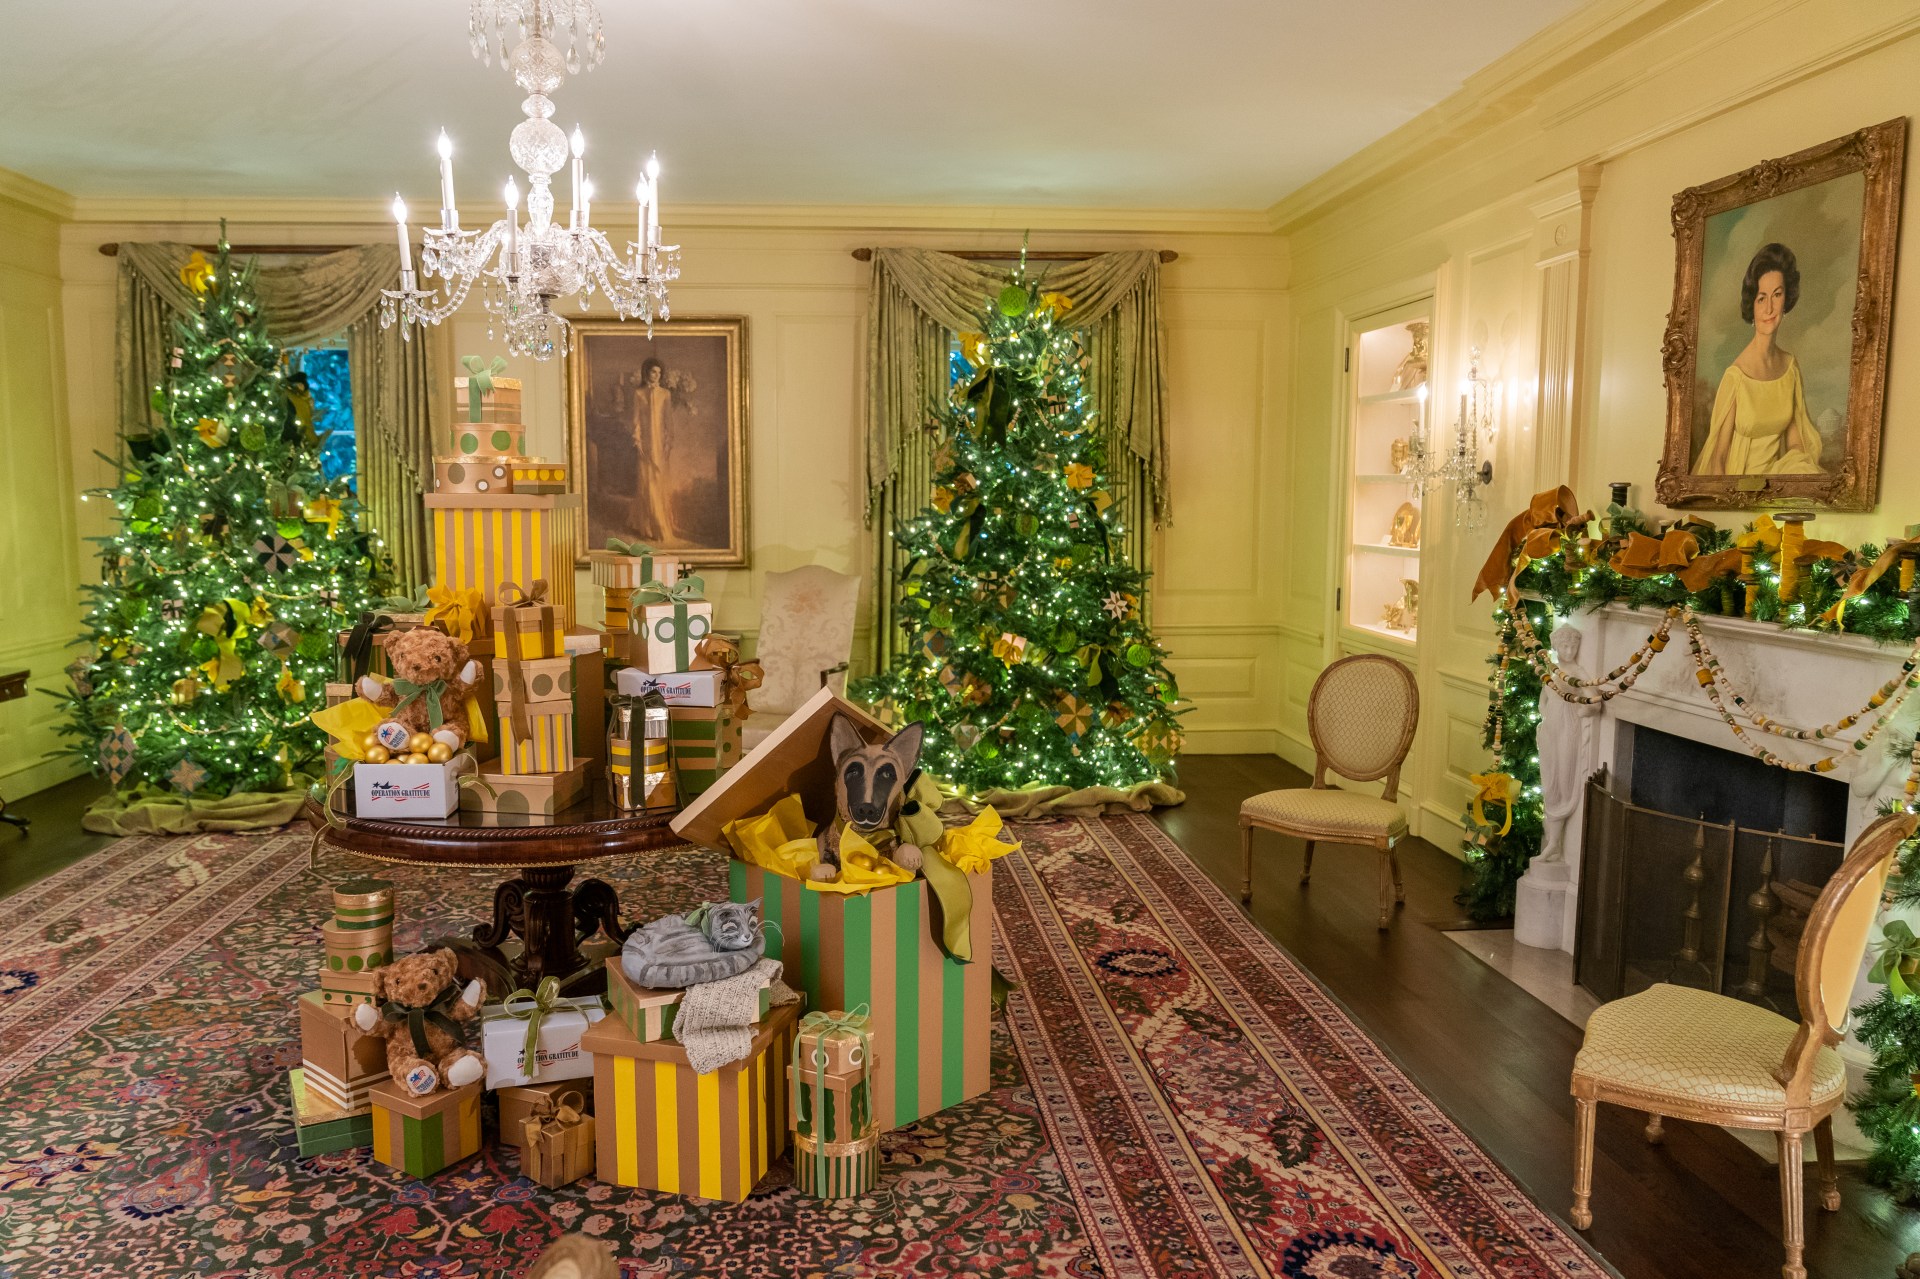 2022 Holidays at the White House | The White House